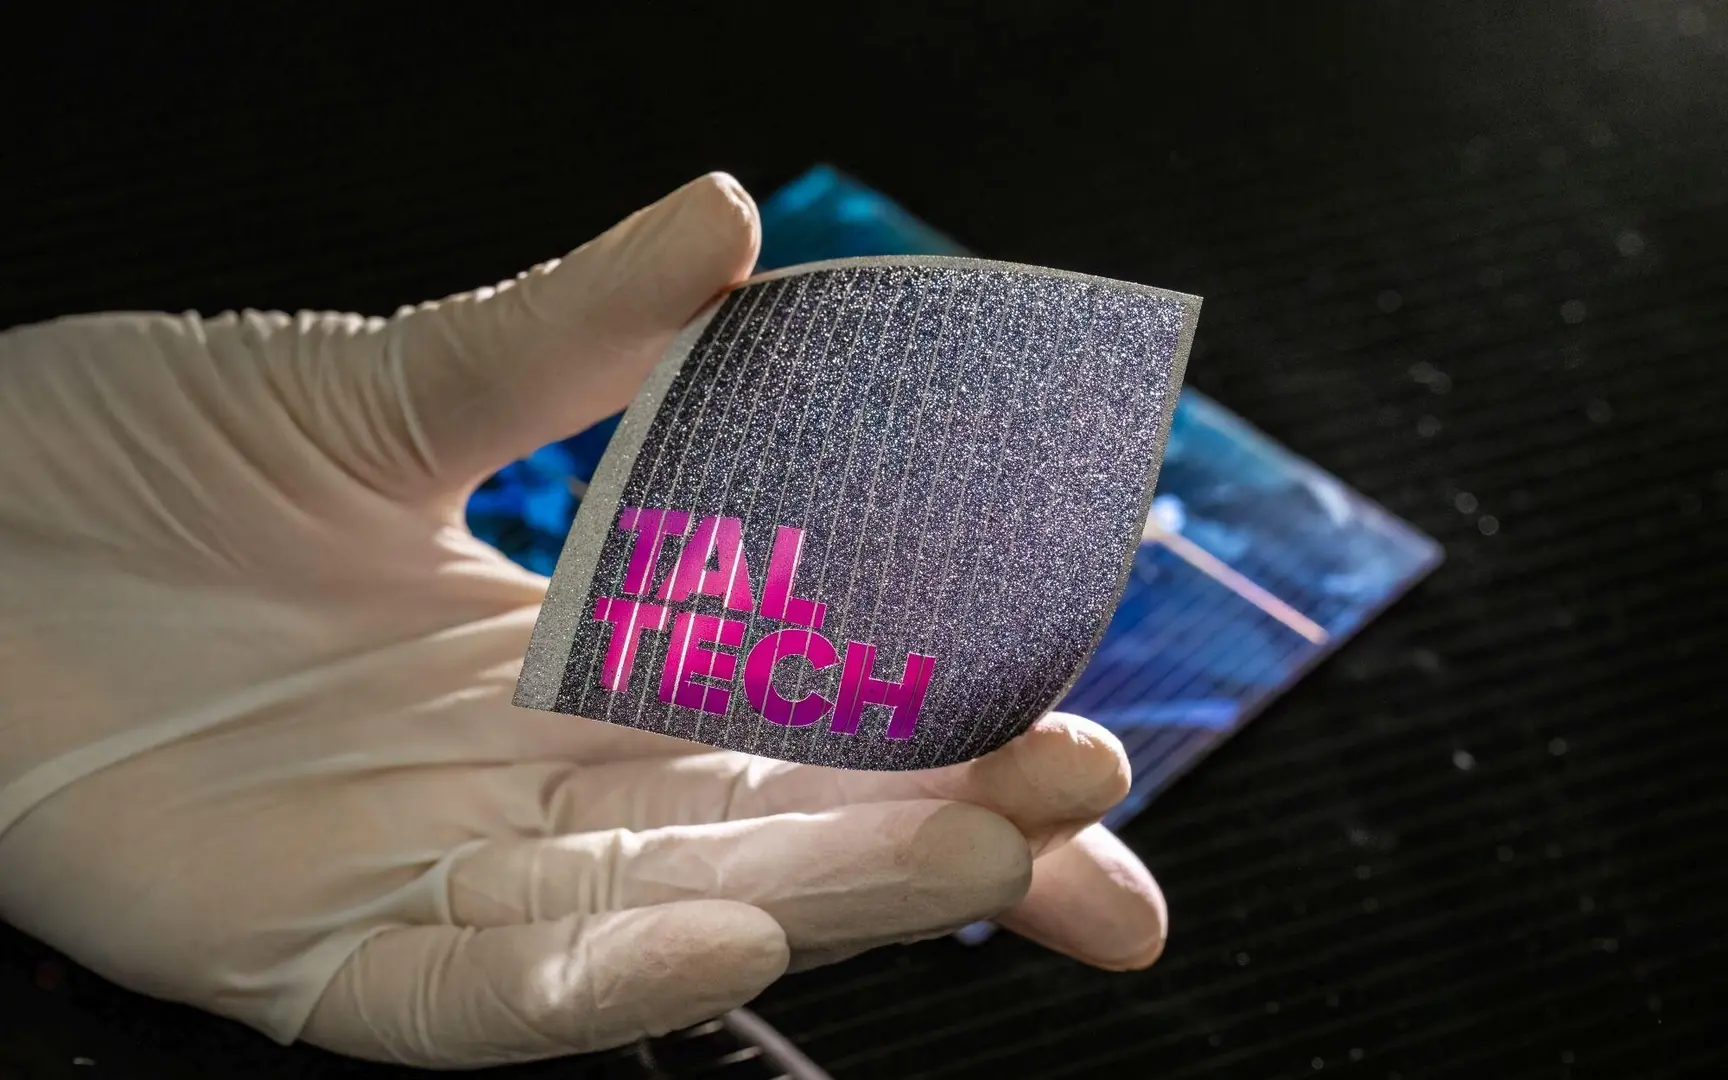 The next step in solar energy: Thin-Film panels